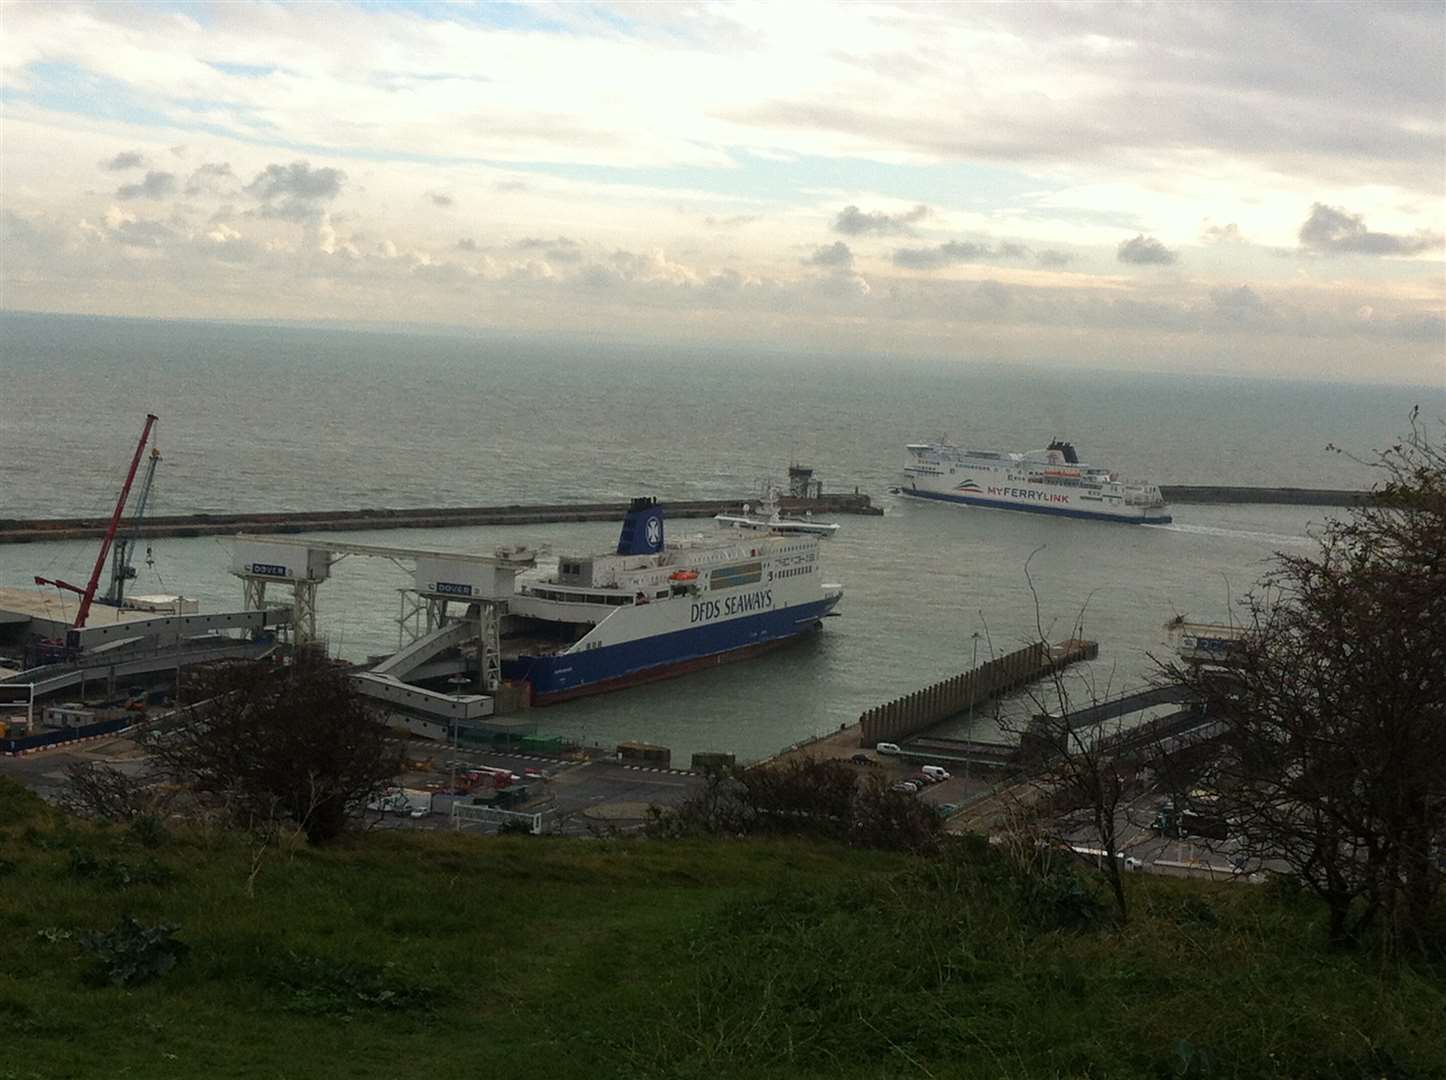 DFDS Dover Seaways hit the harbour wall